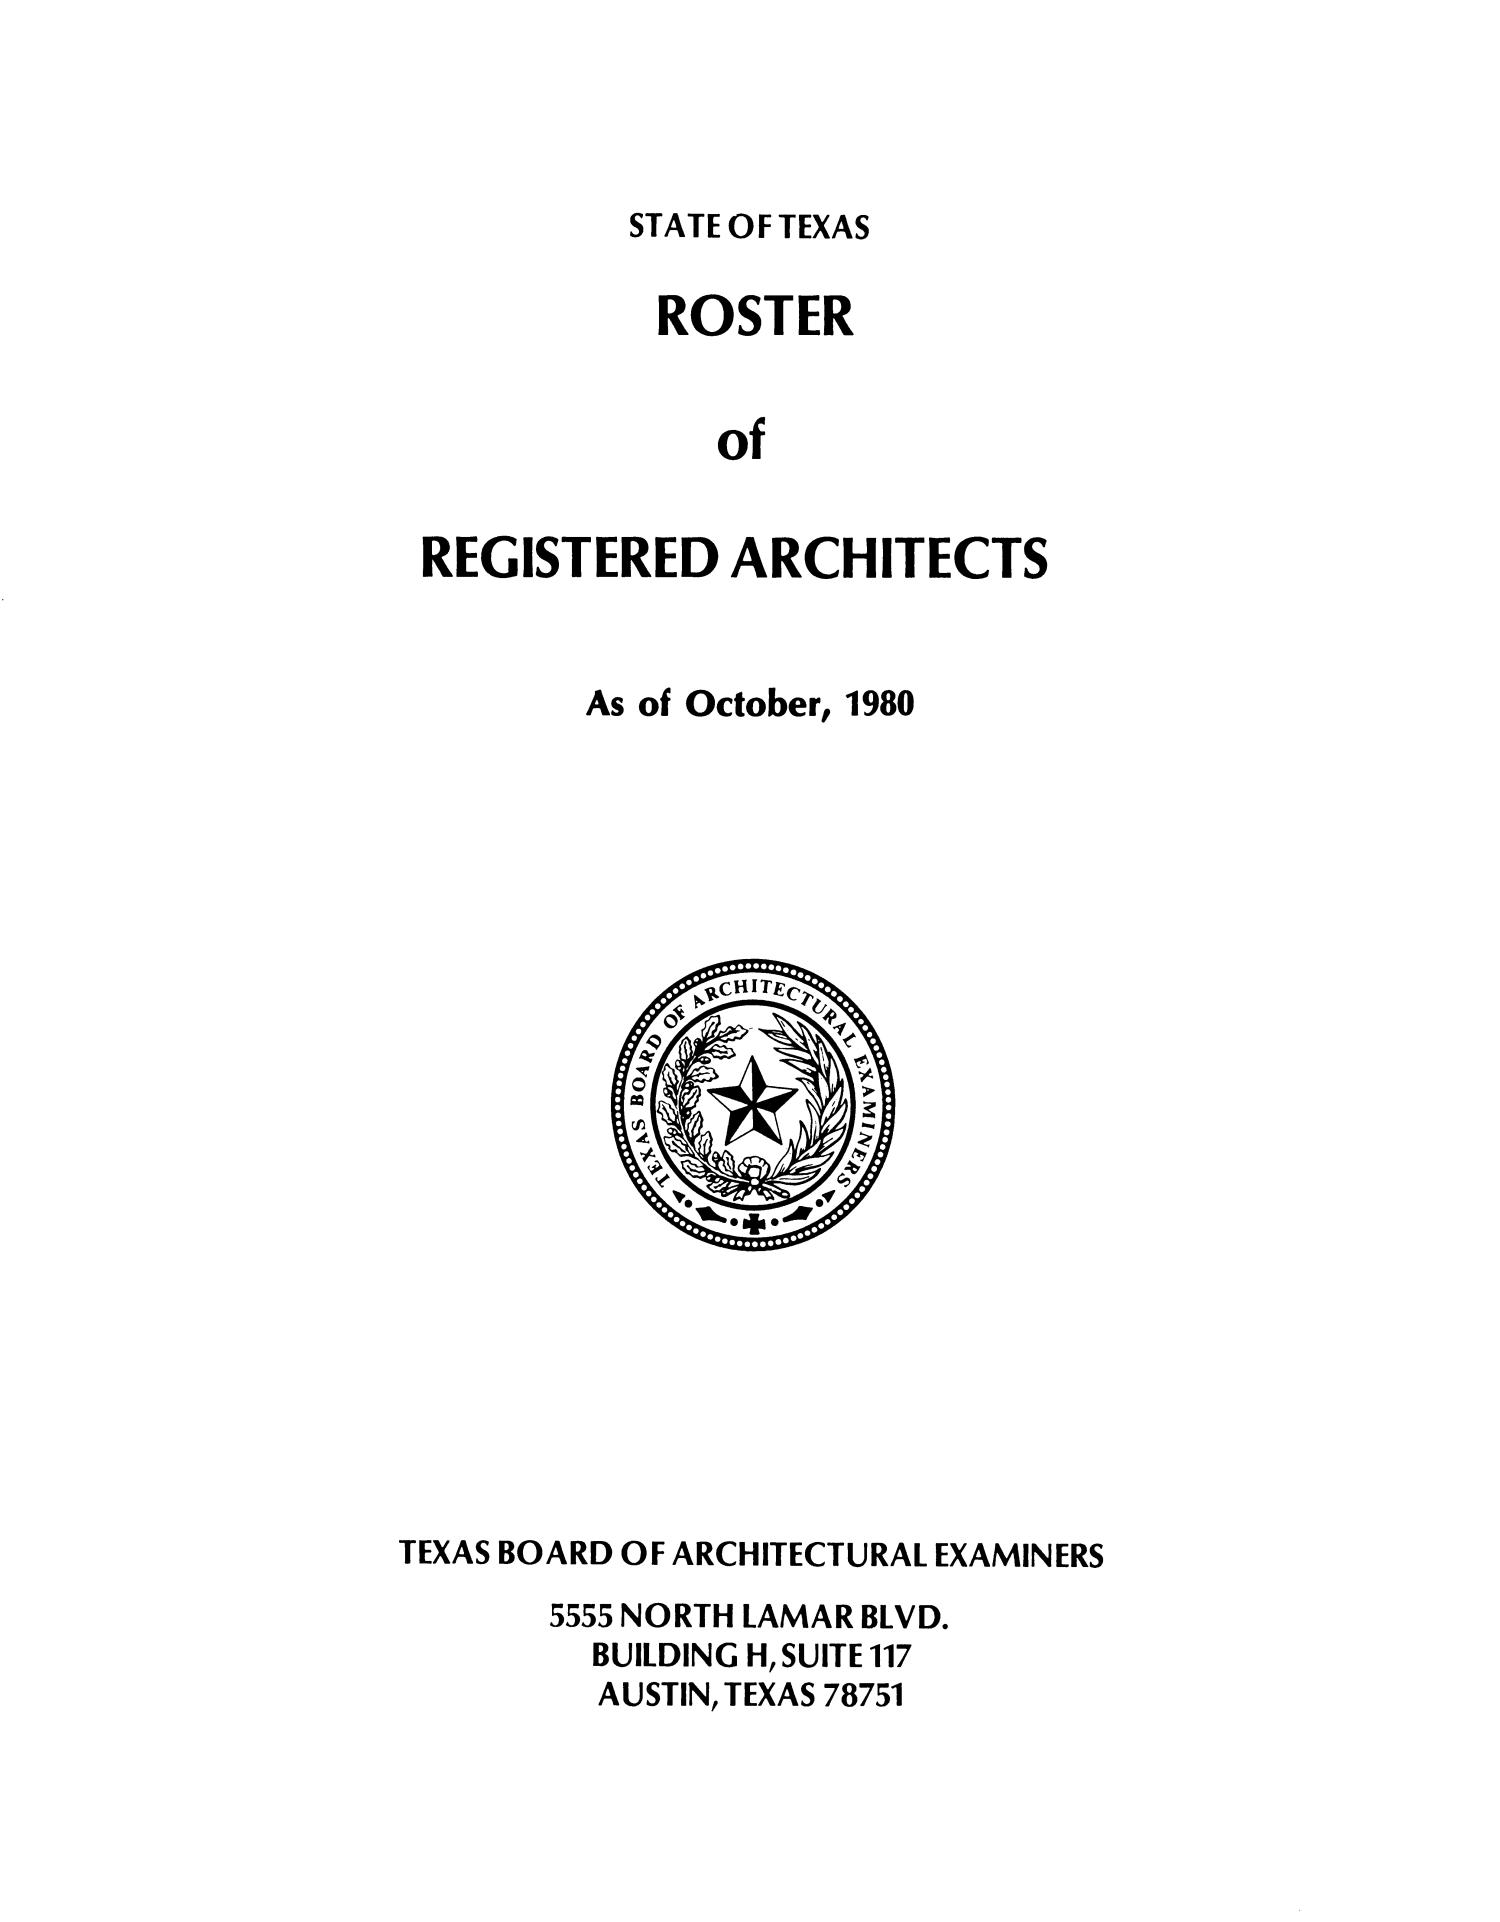 Roster of registered Architects
                                                
                                                    TITLE PAGE
                                                